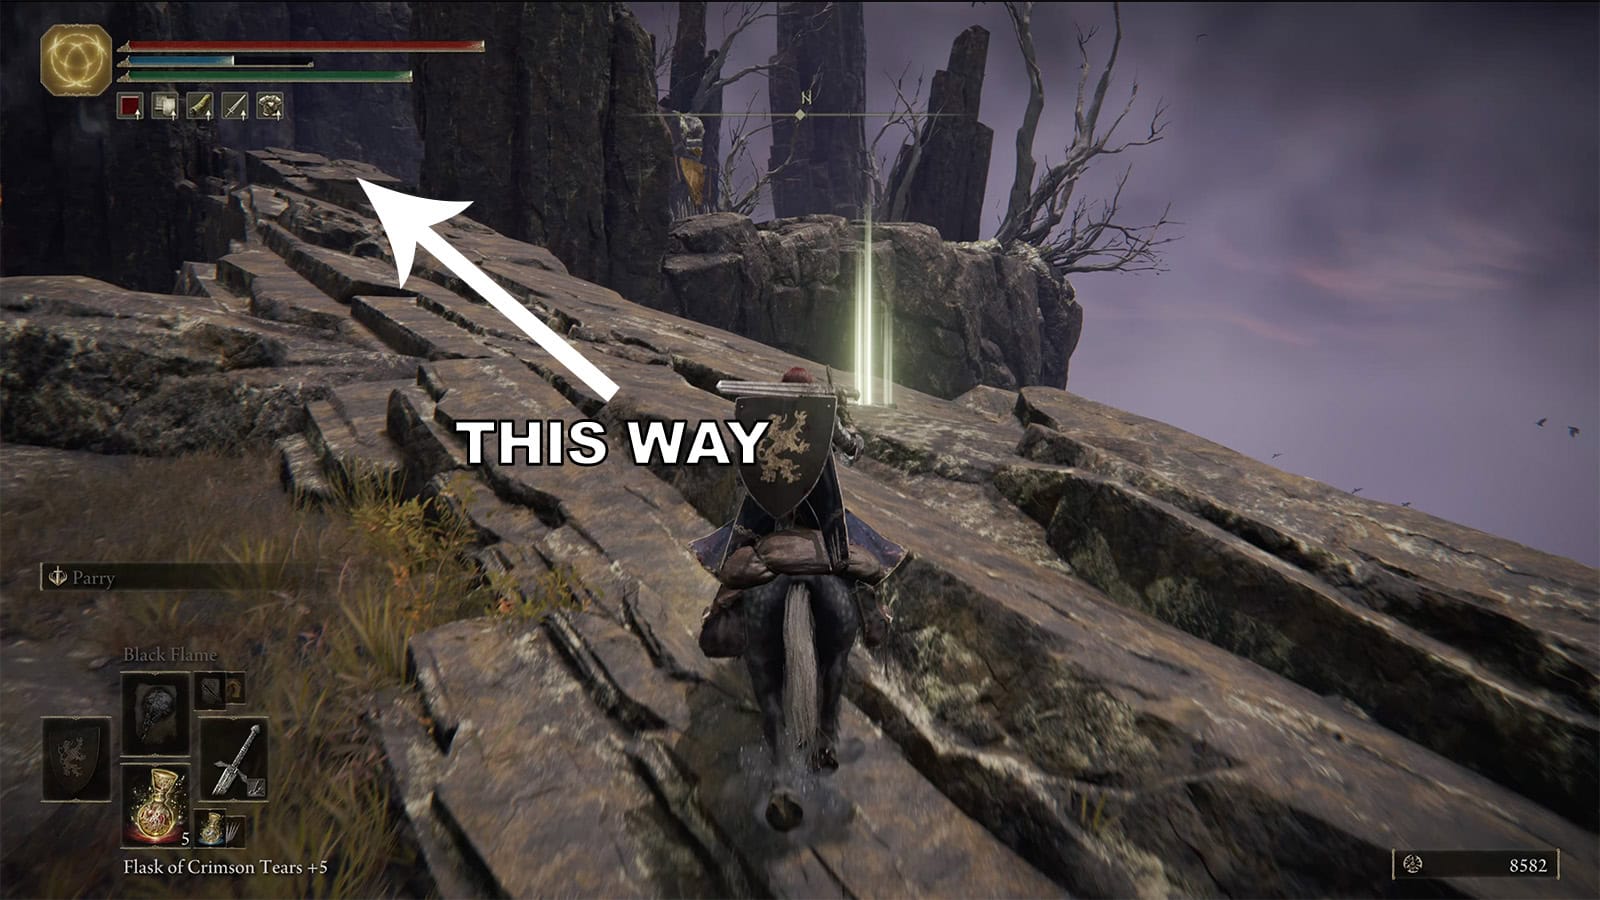 An image of an Elden Ring character using a rock formation to cross a canyon